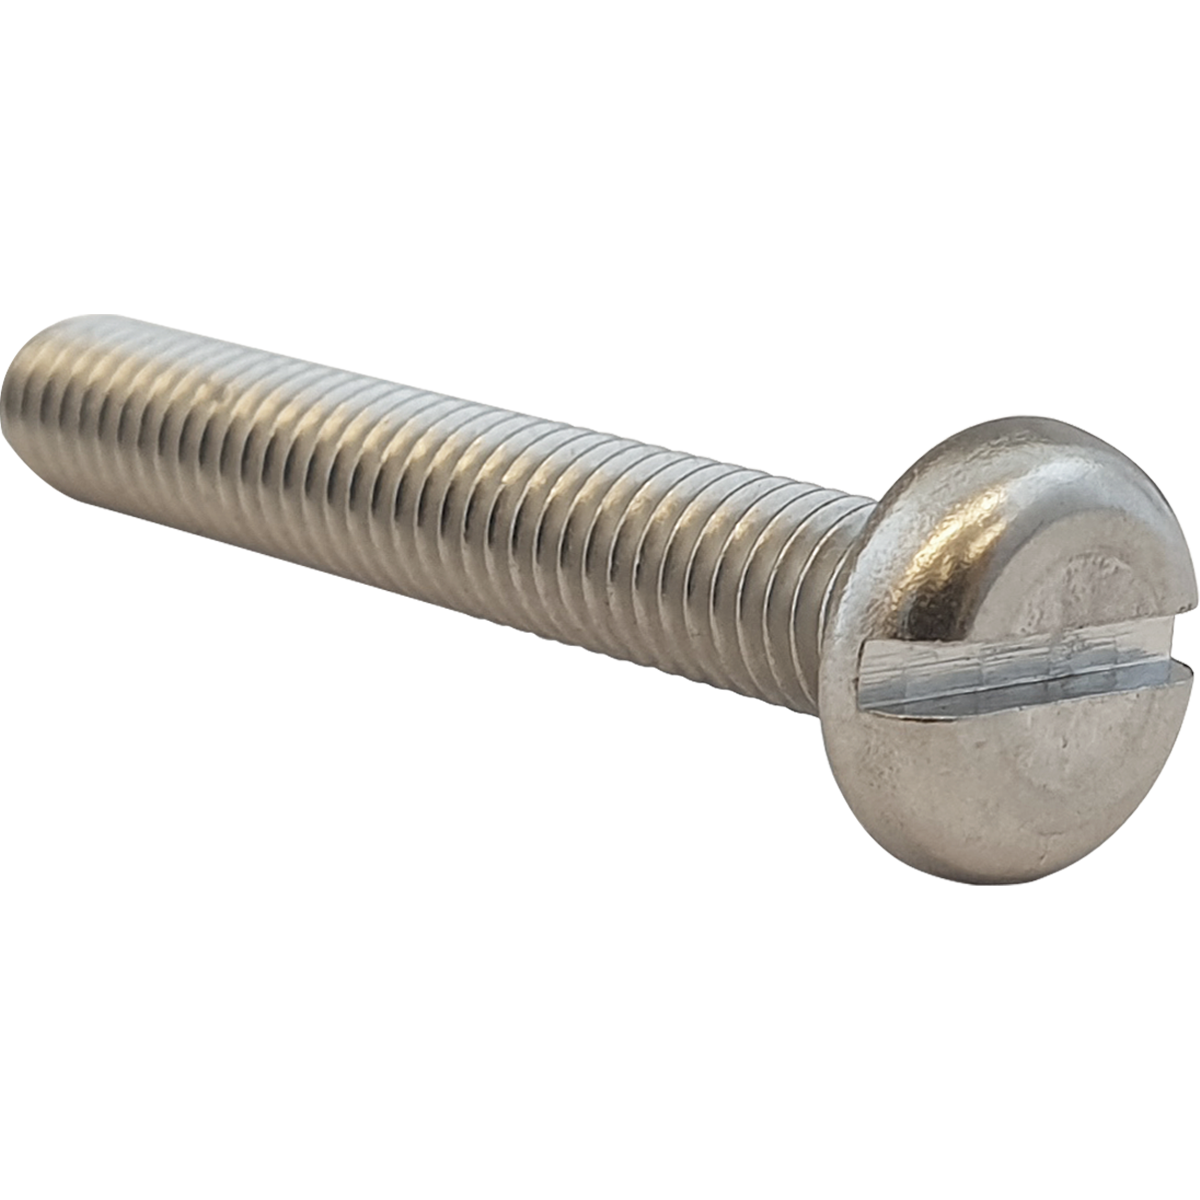 Machine Screws with a slotted pan head and manufactured in A2 stainless steel, offering a good level of corrosion resistance